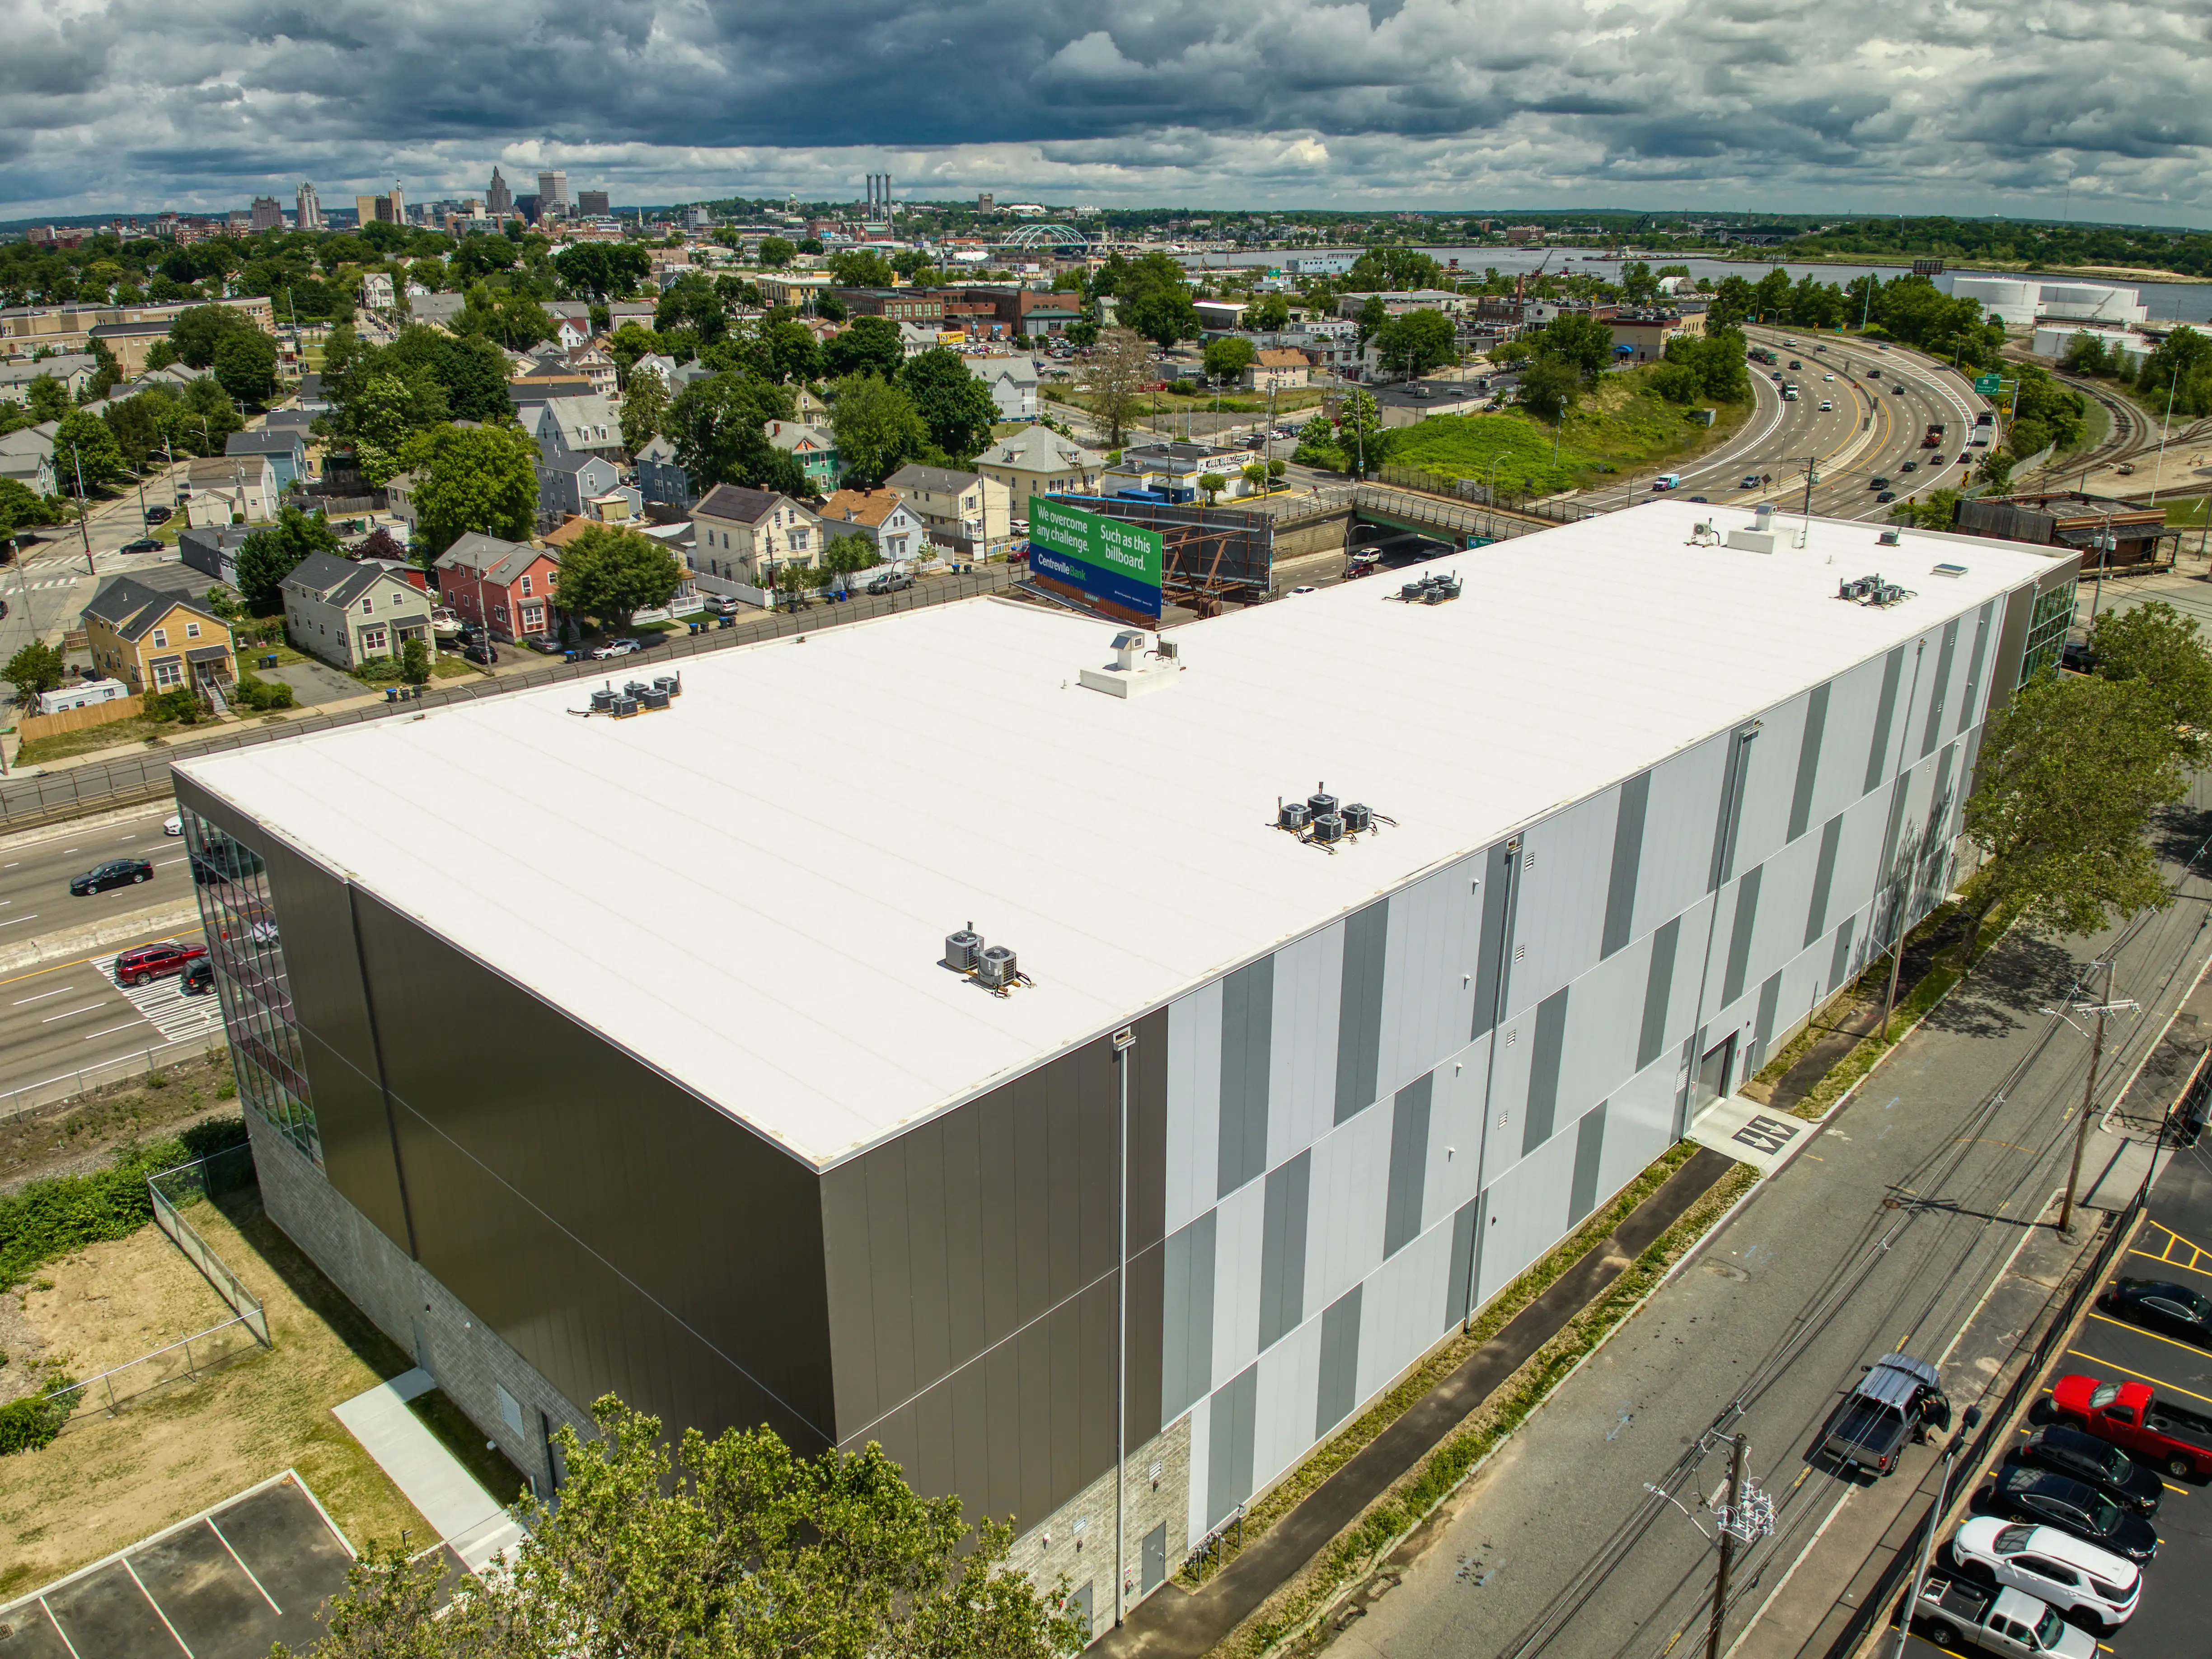 1117 eddy street providence ri self storage facility - commercial roofing project